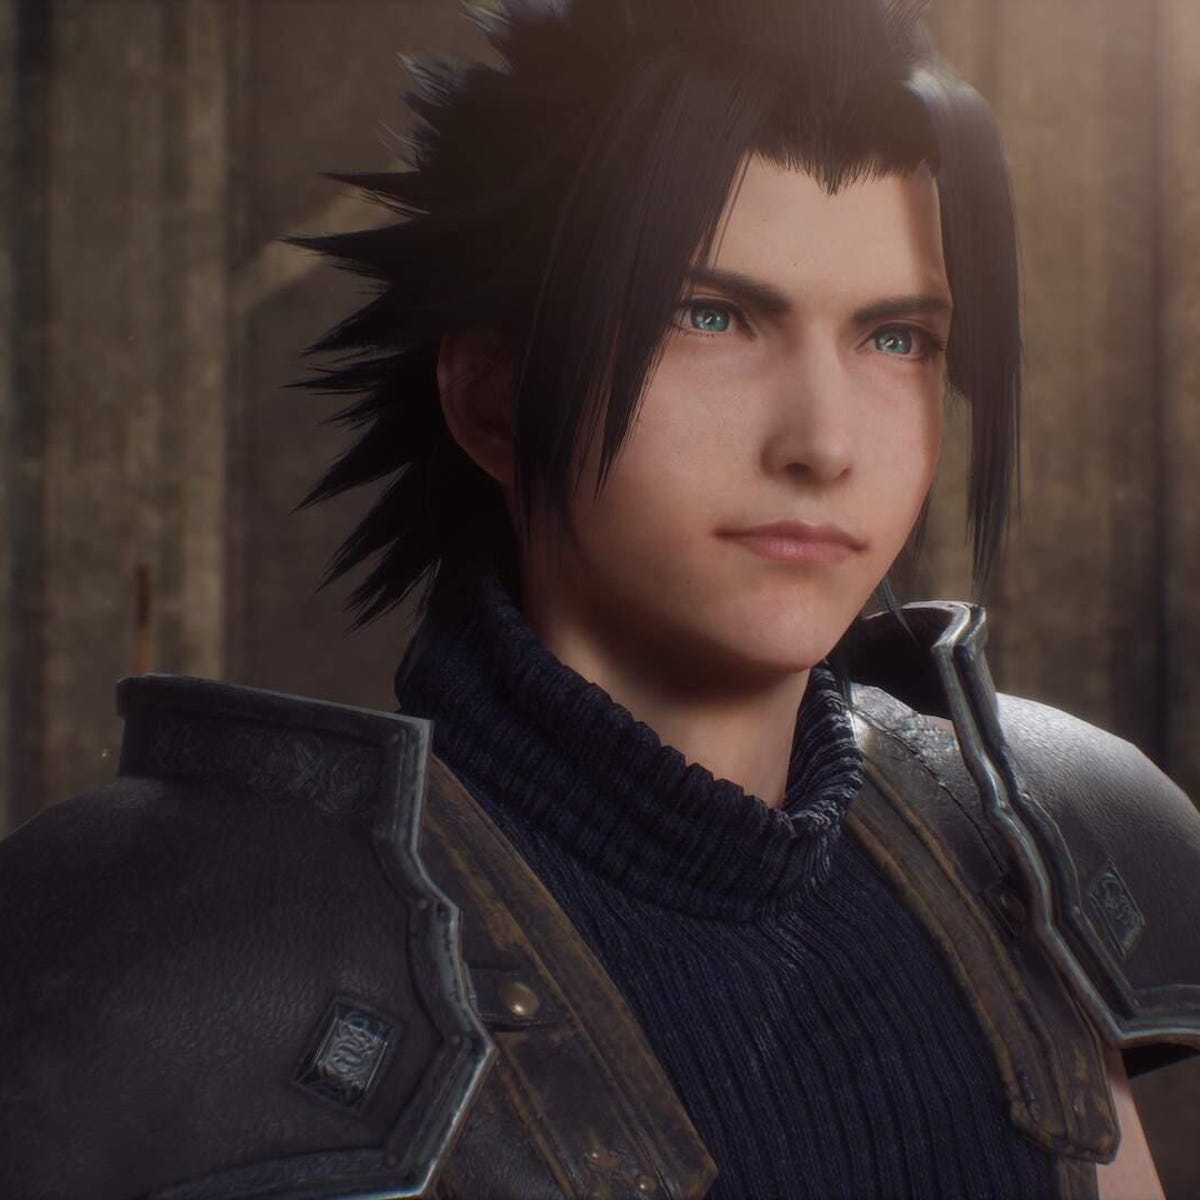 Crisis Core Final Fantasy 7 Remake: December Release Date and